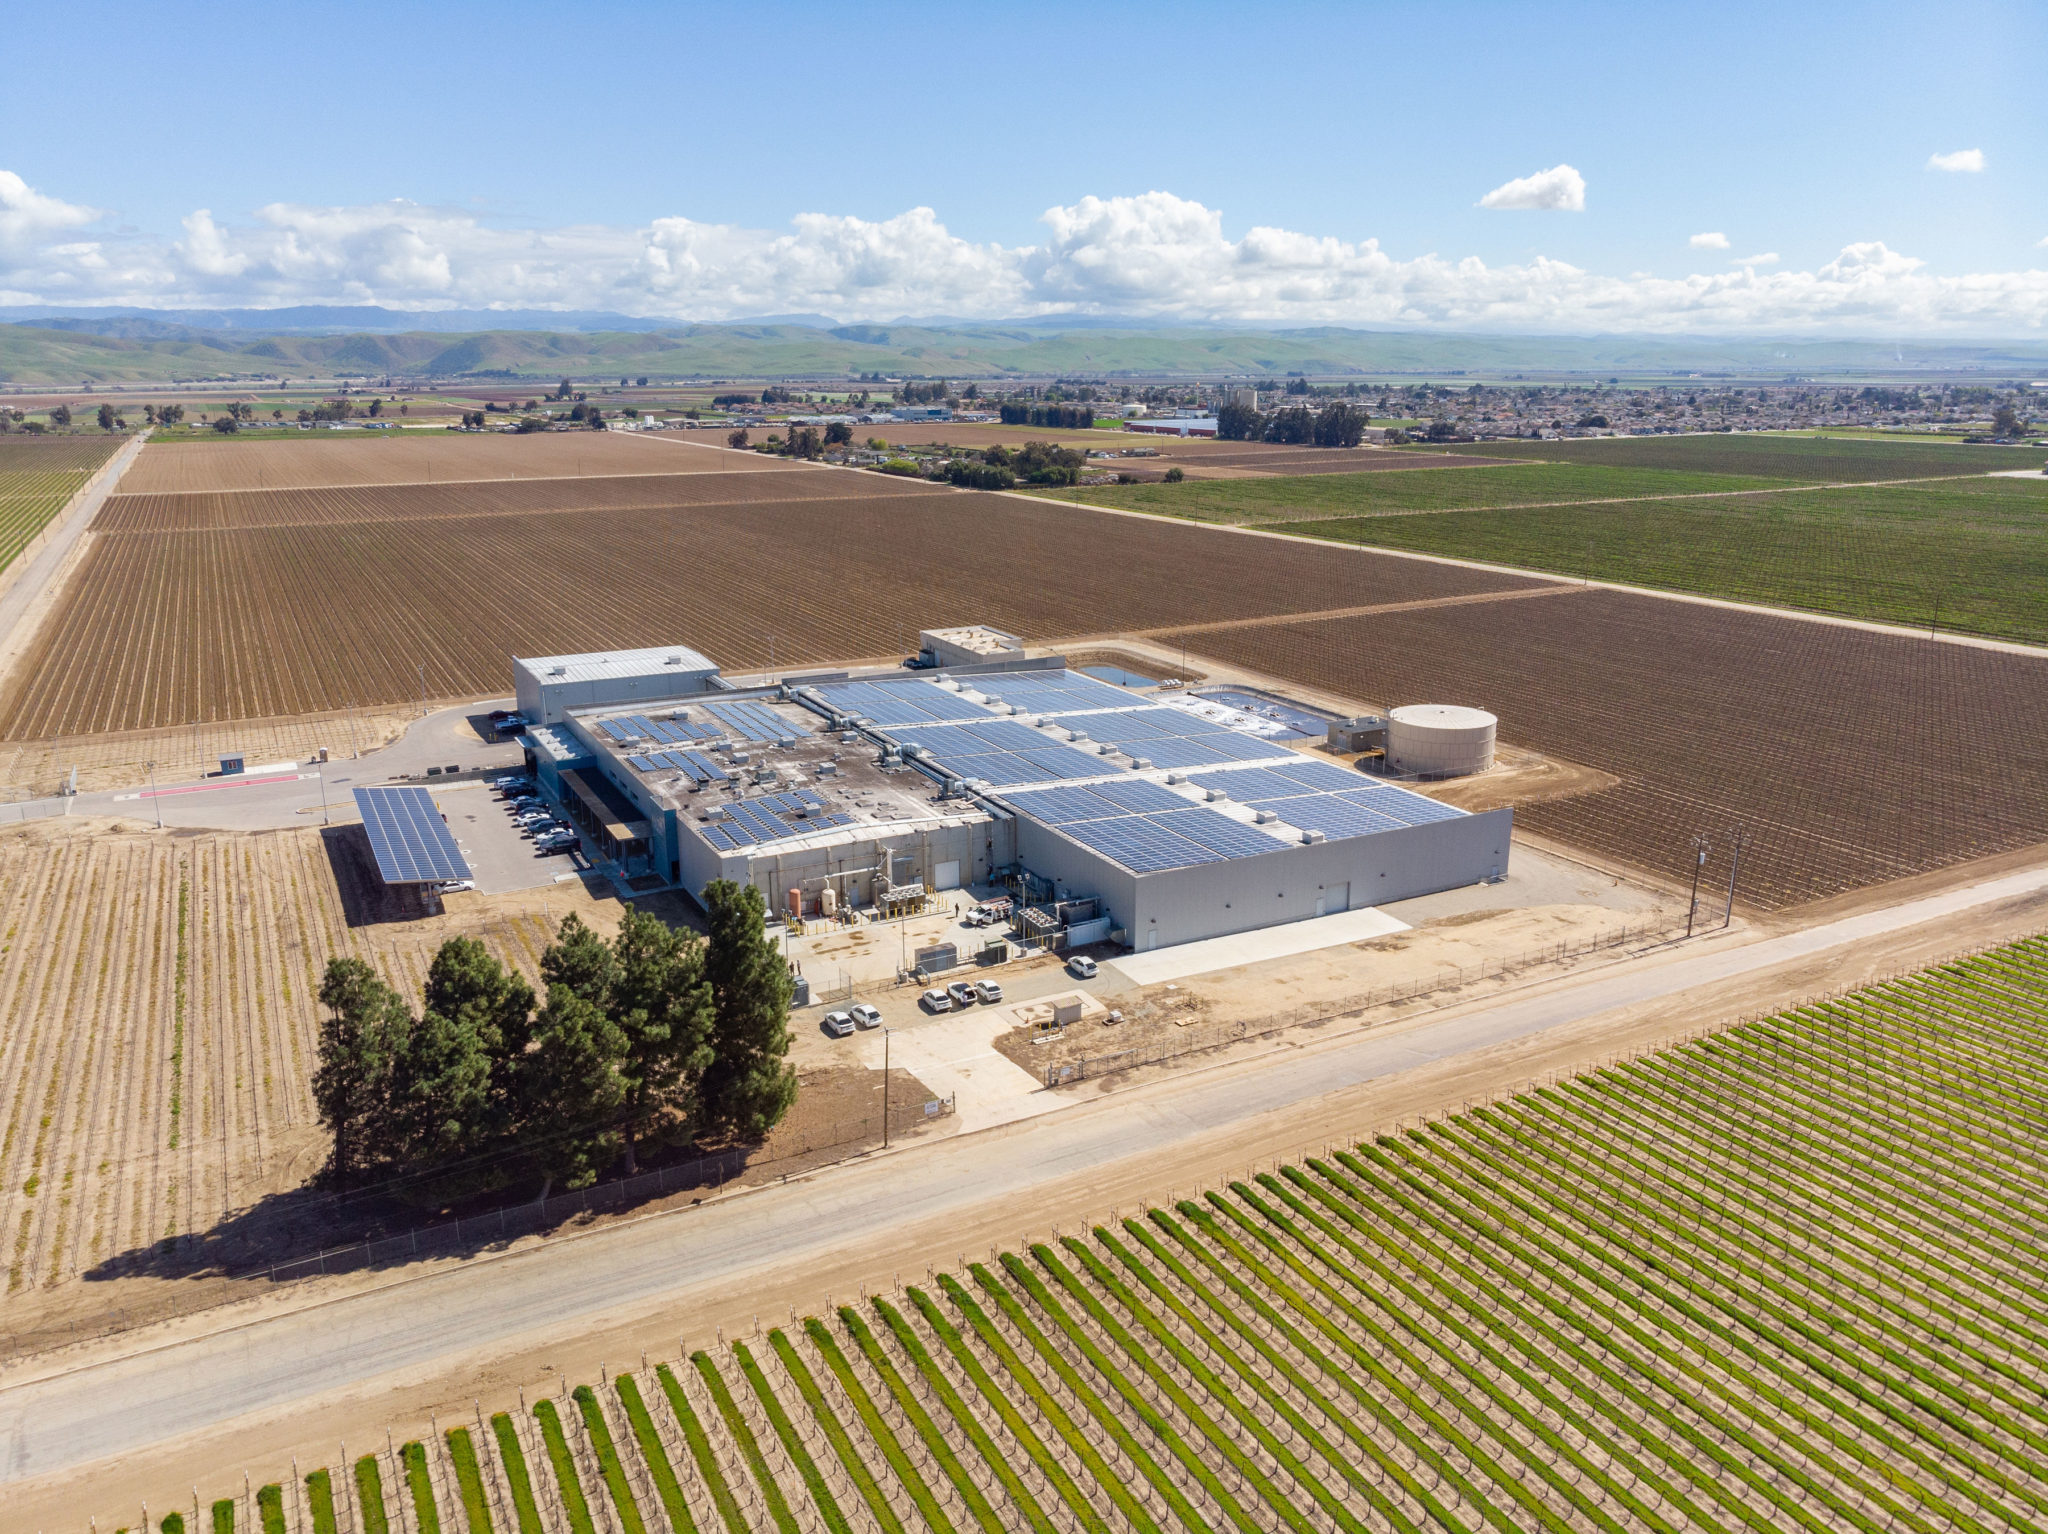 Aerial view of the solar panels on the J Lohr Vineyards & Wines building in Paso Robles, California, surrounded by farmland.